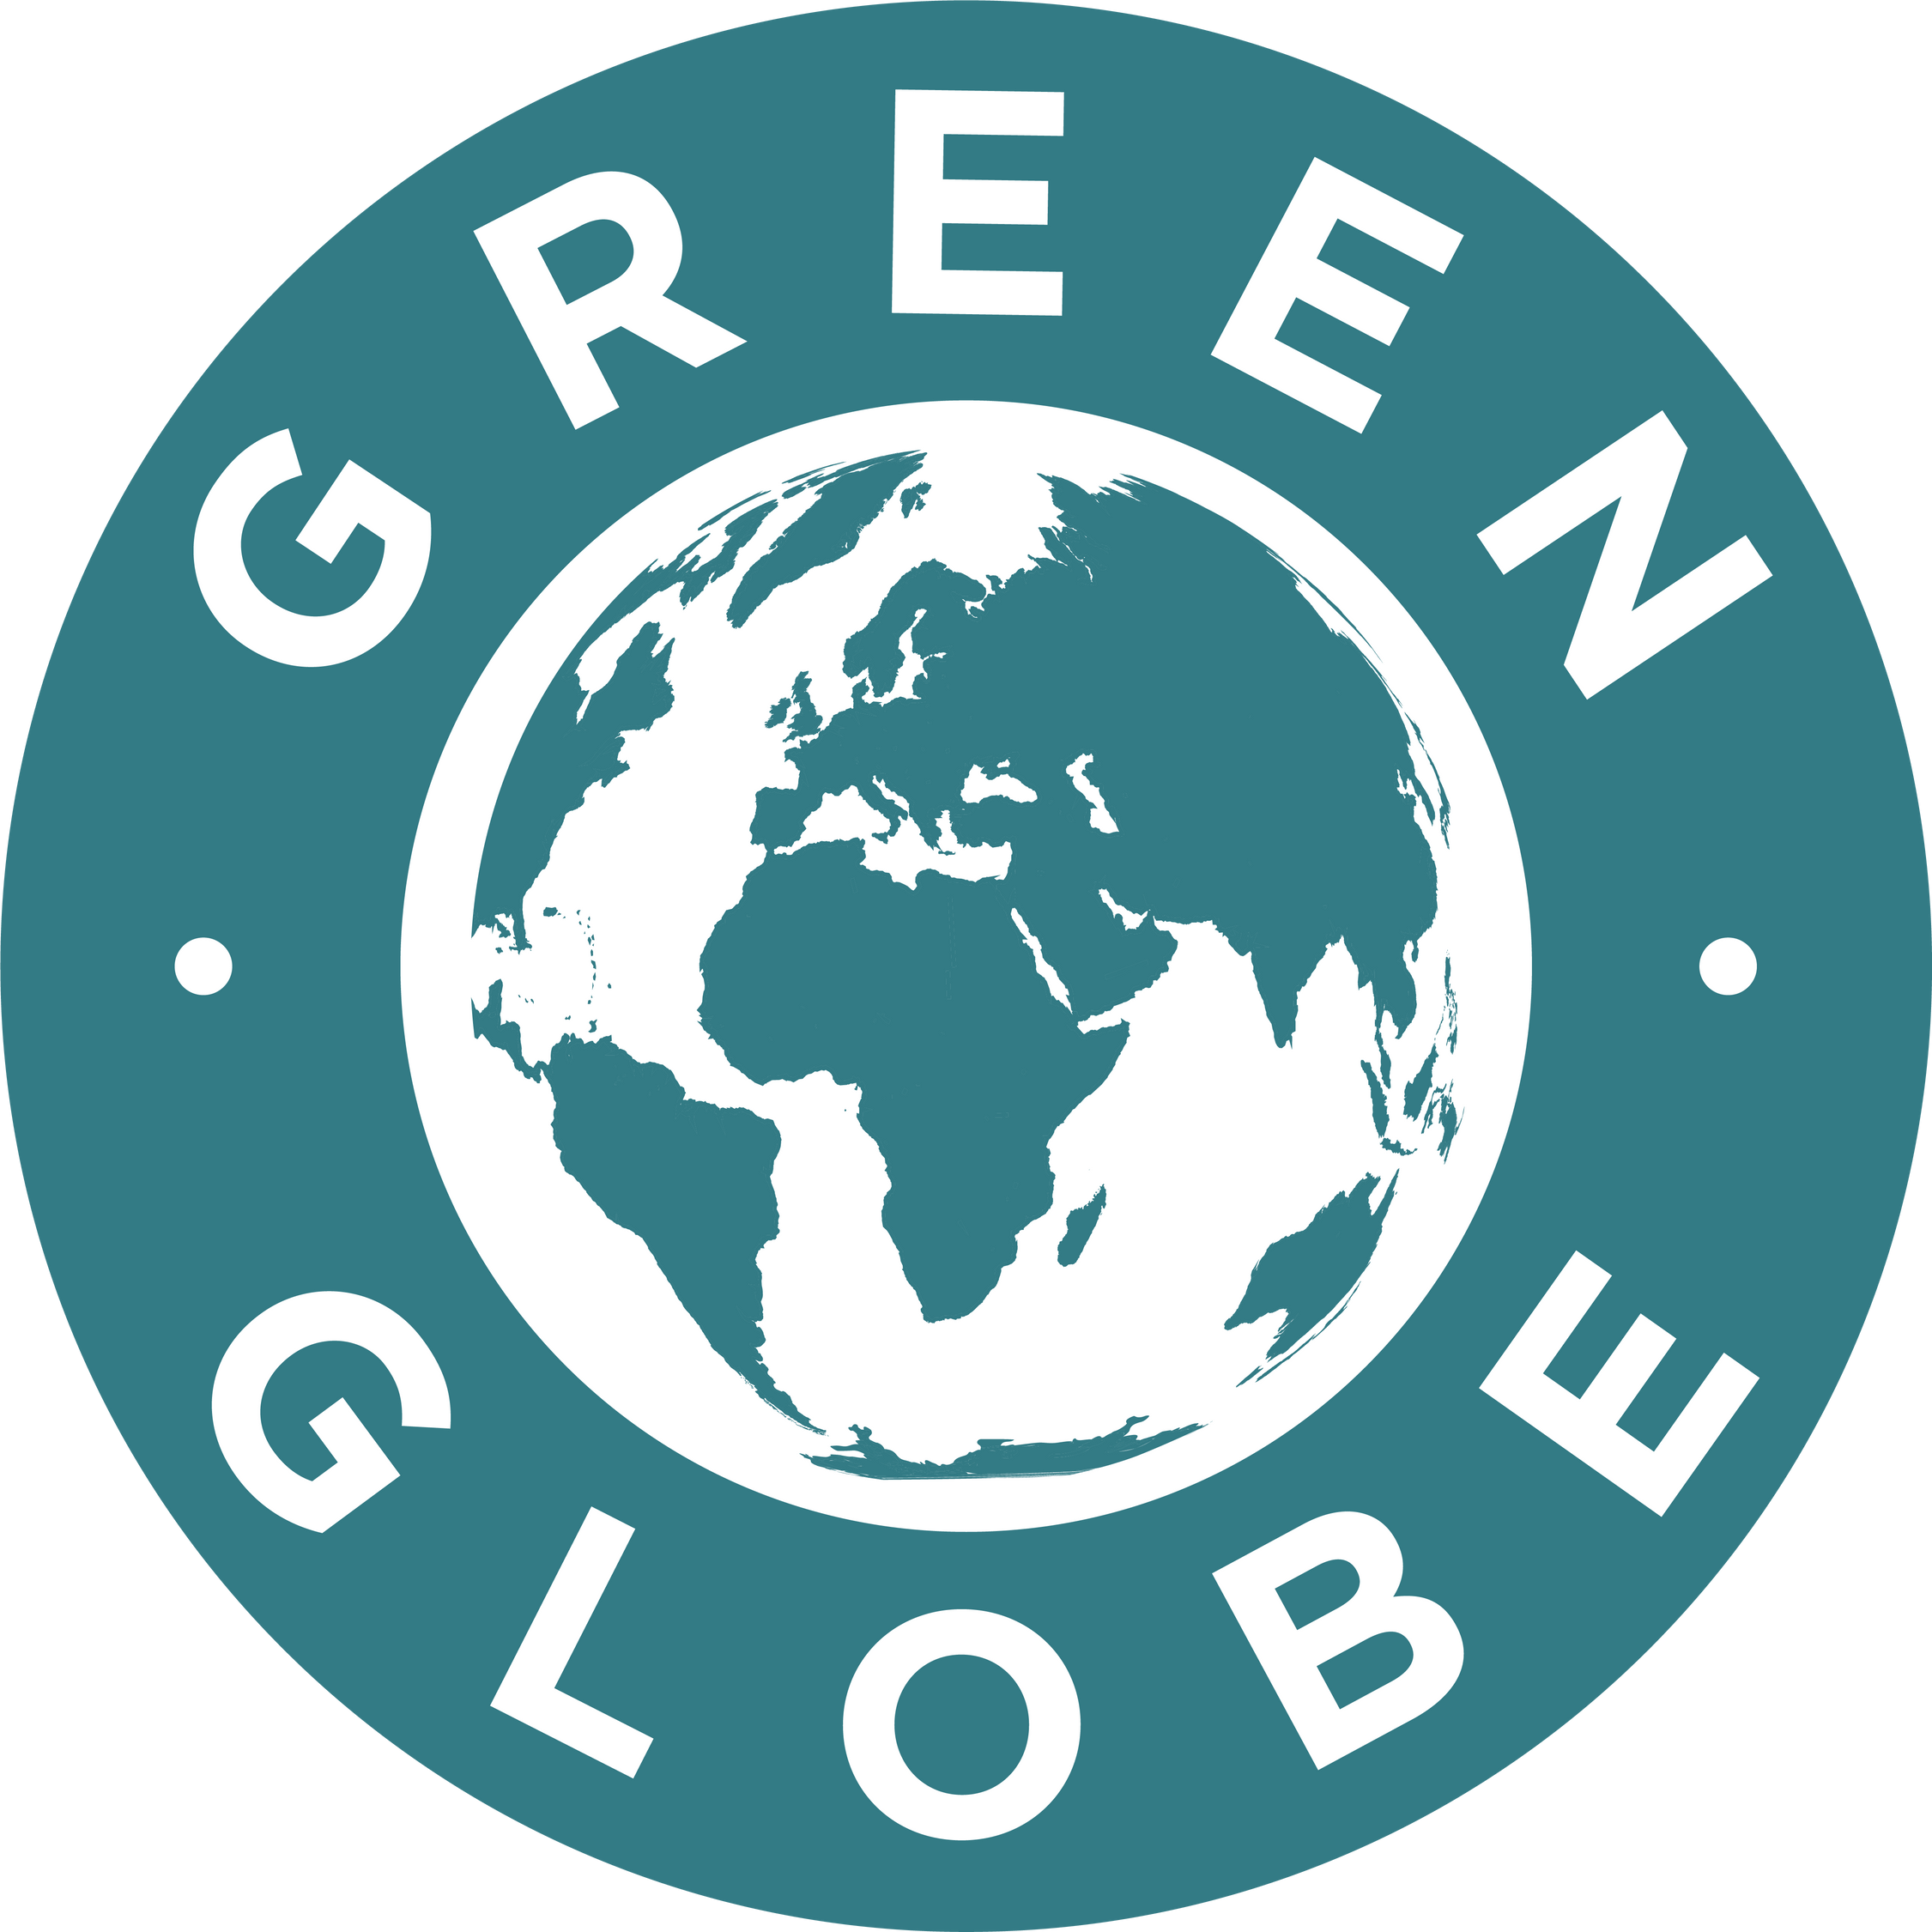 Green Globe UK certification services for sustainable tourism and business